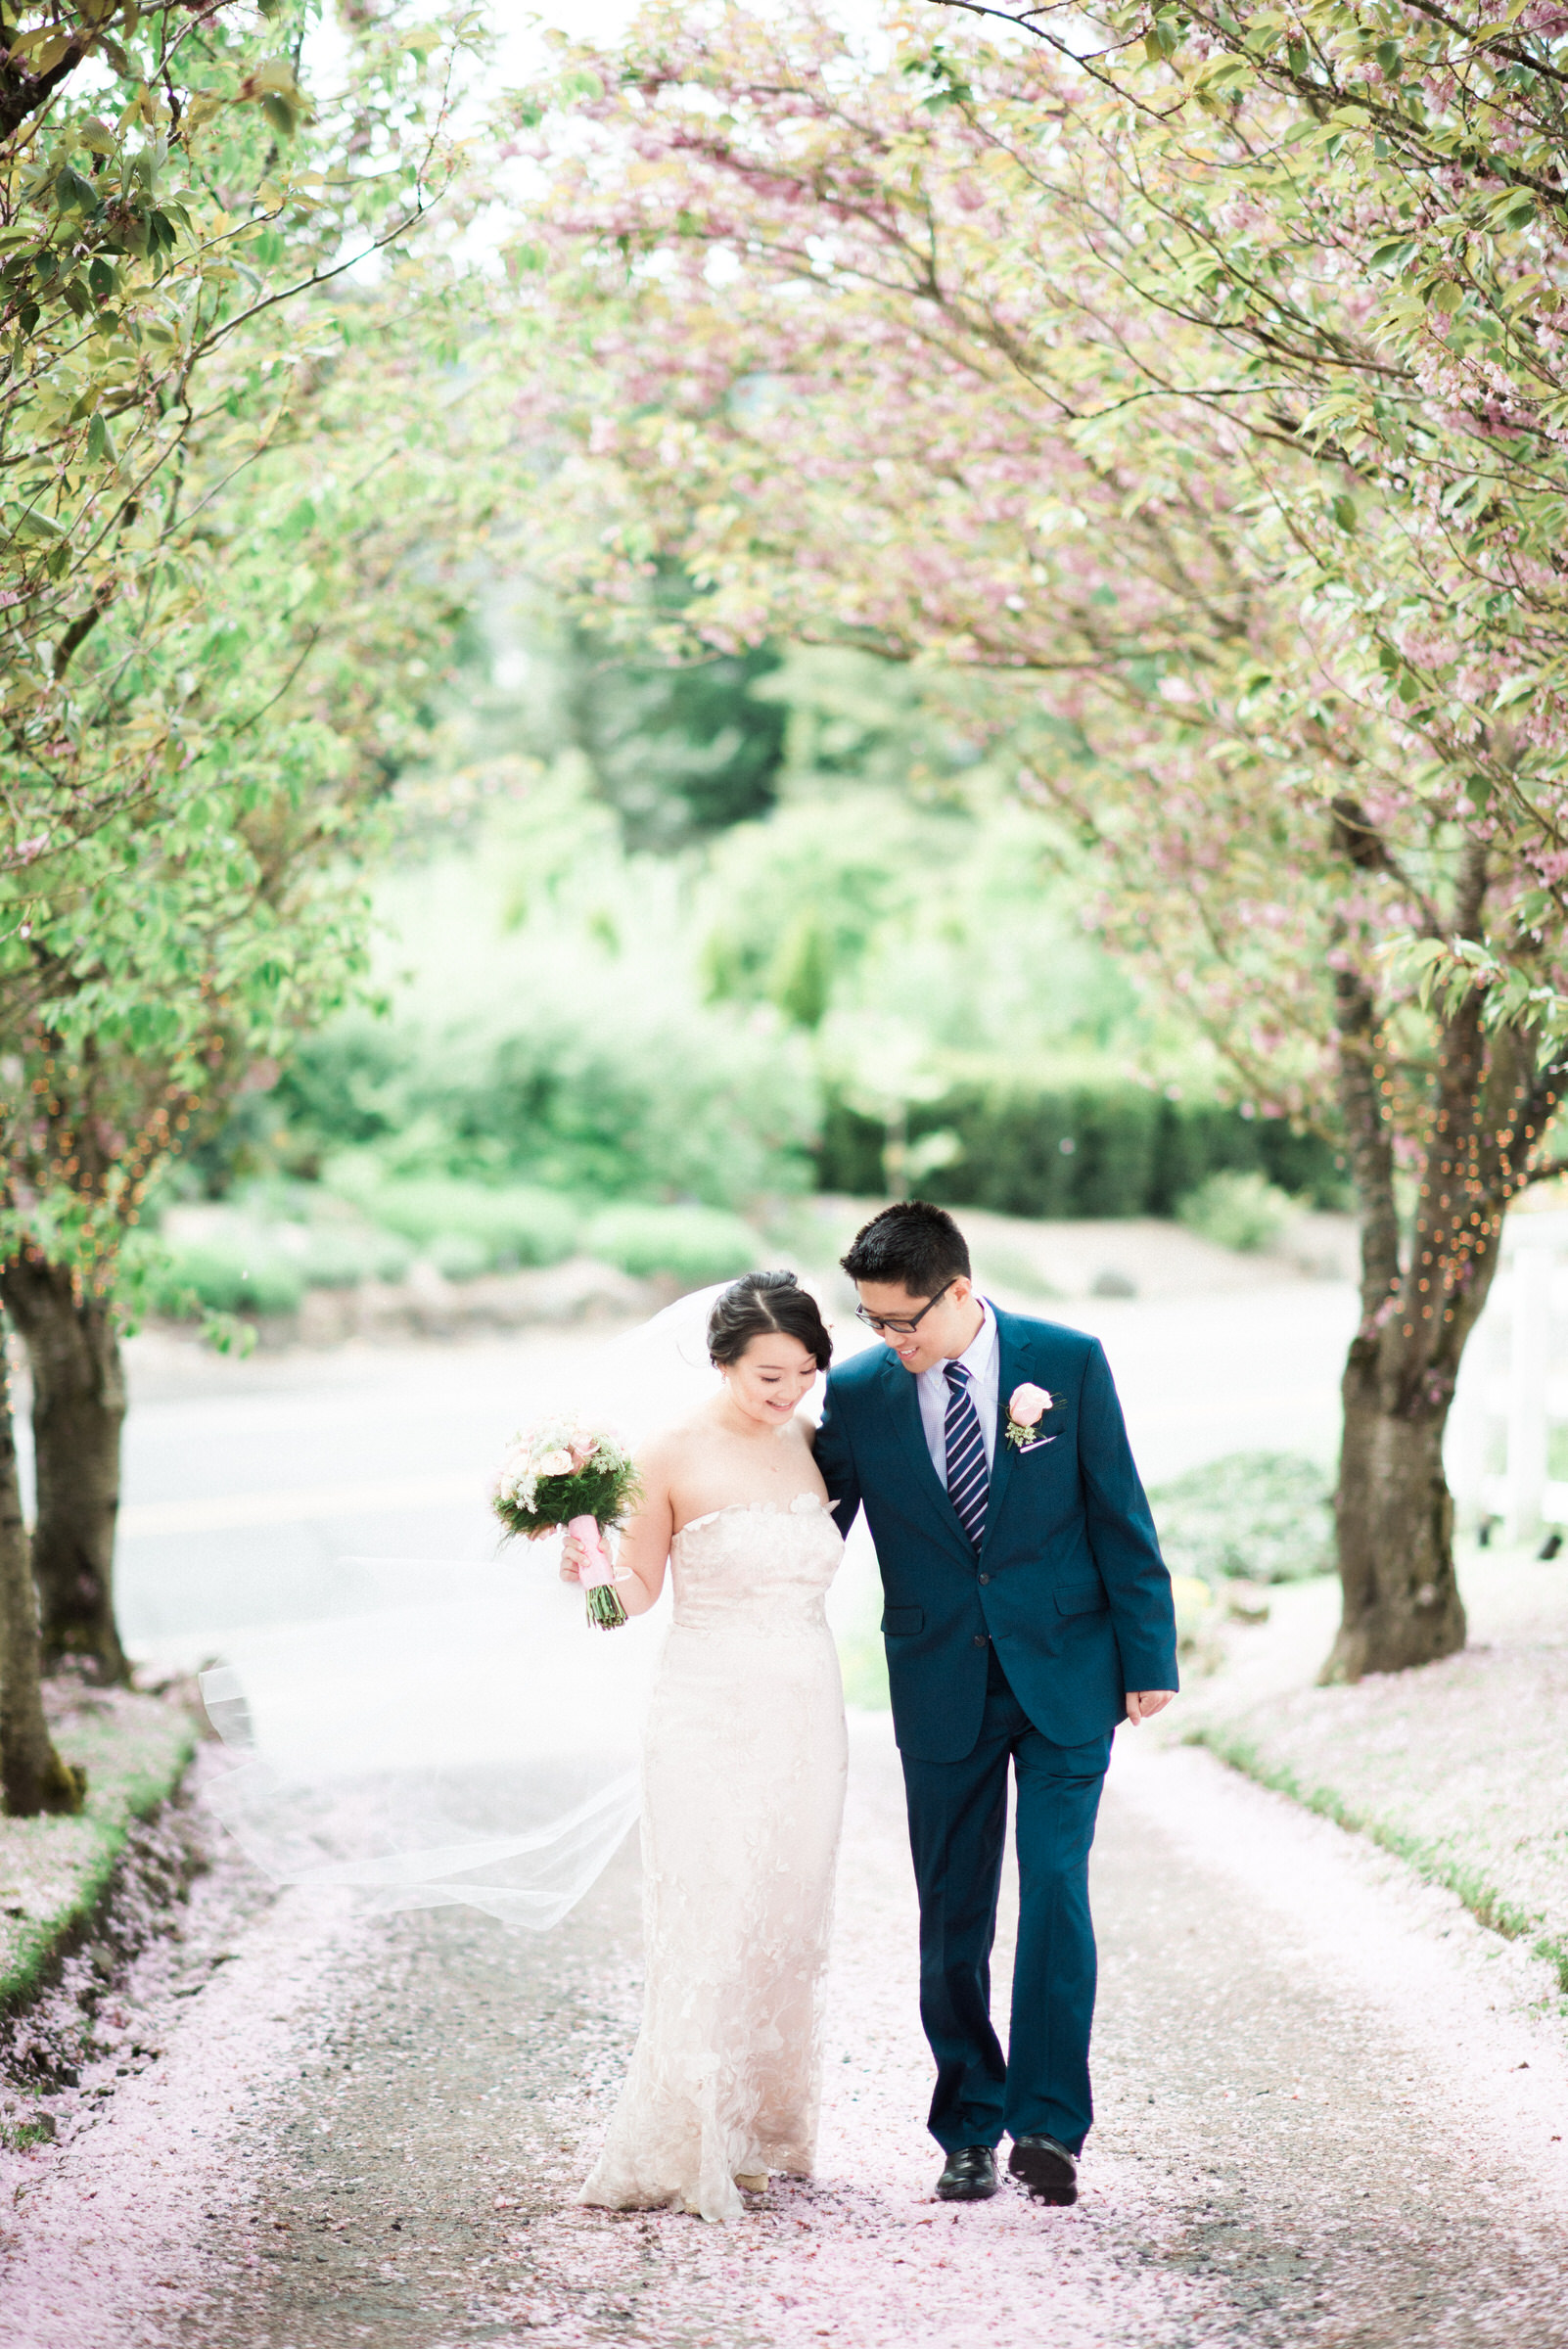 A Spring Wedding at DeLille Cellars: Angela and Sheng (30)